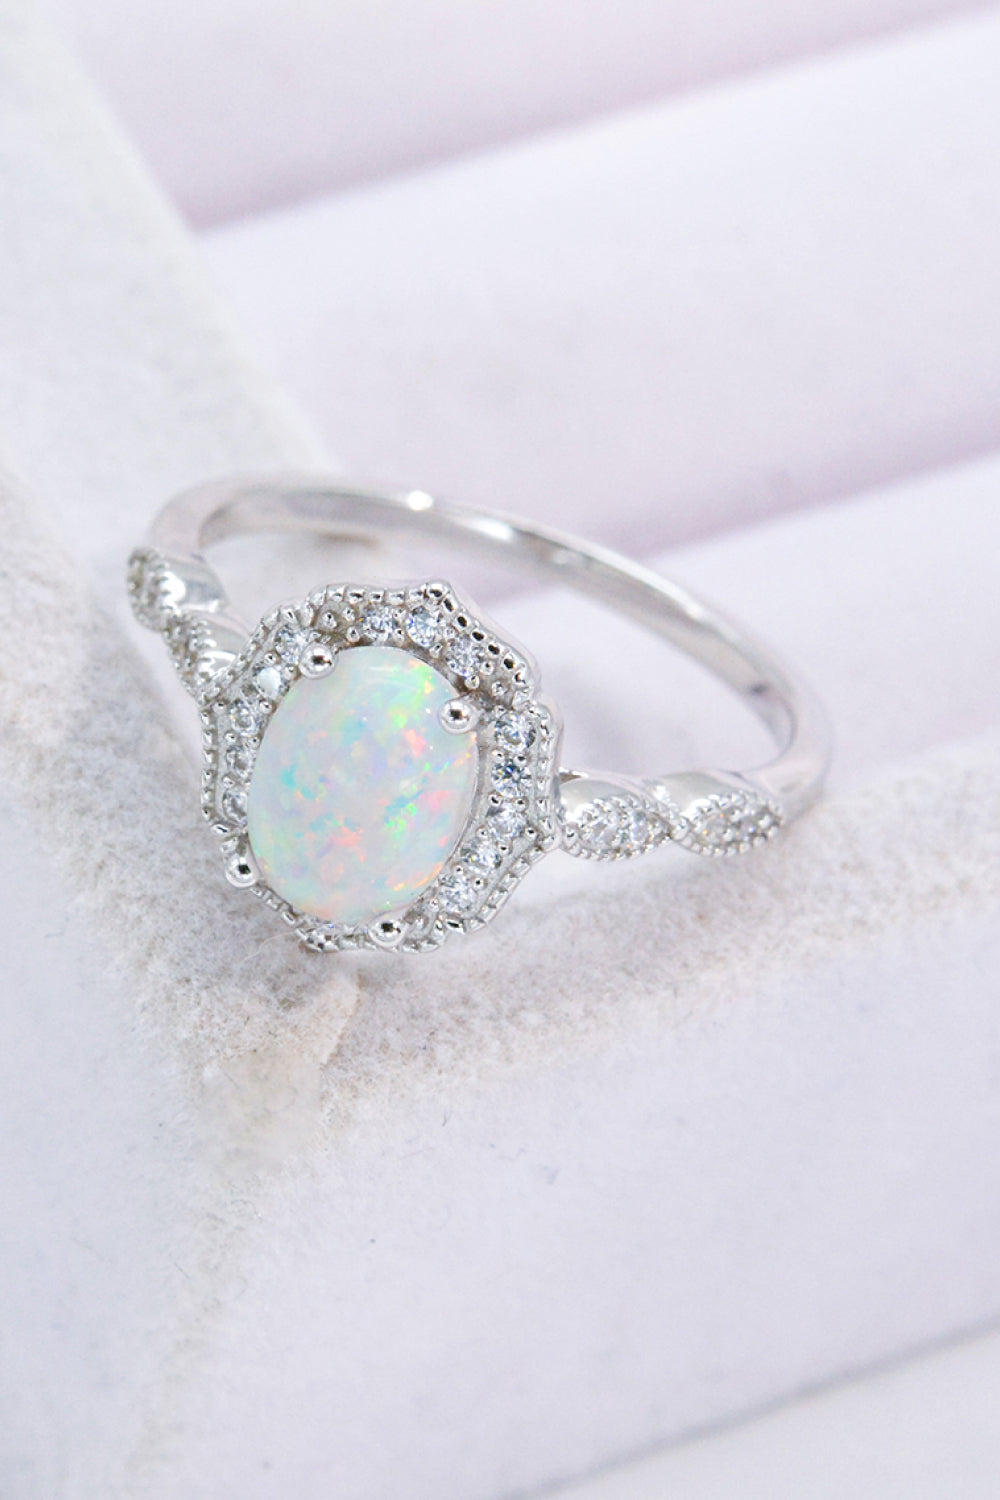 Just For You 925 Sterling Silver Opal Ring-Rings-Inspired by Justeen-Women's Clothing Boutique in Chicago, Illinois